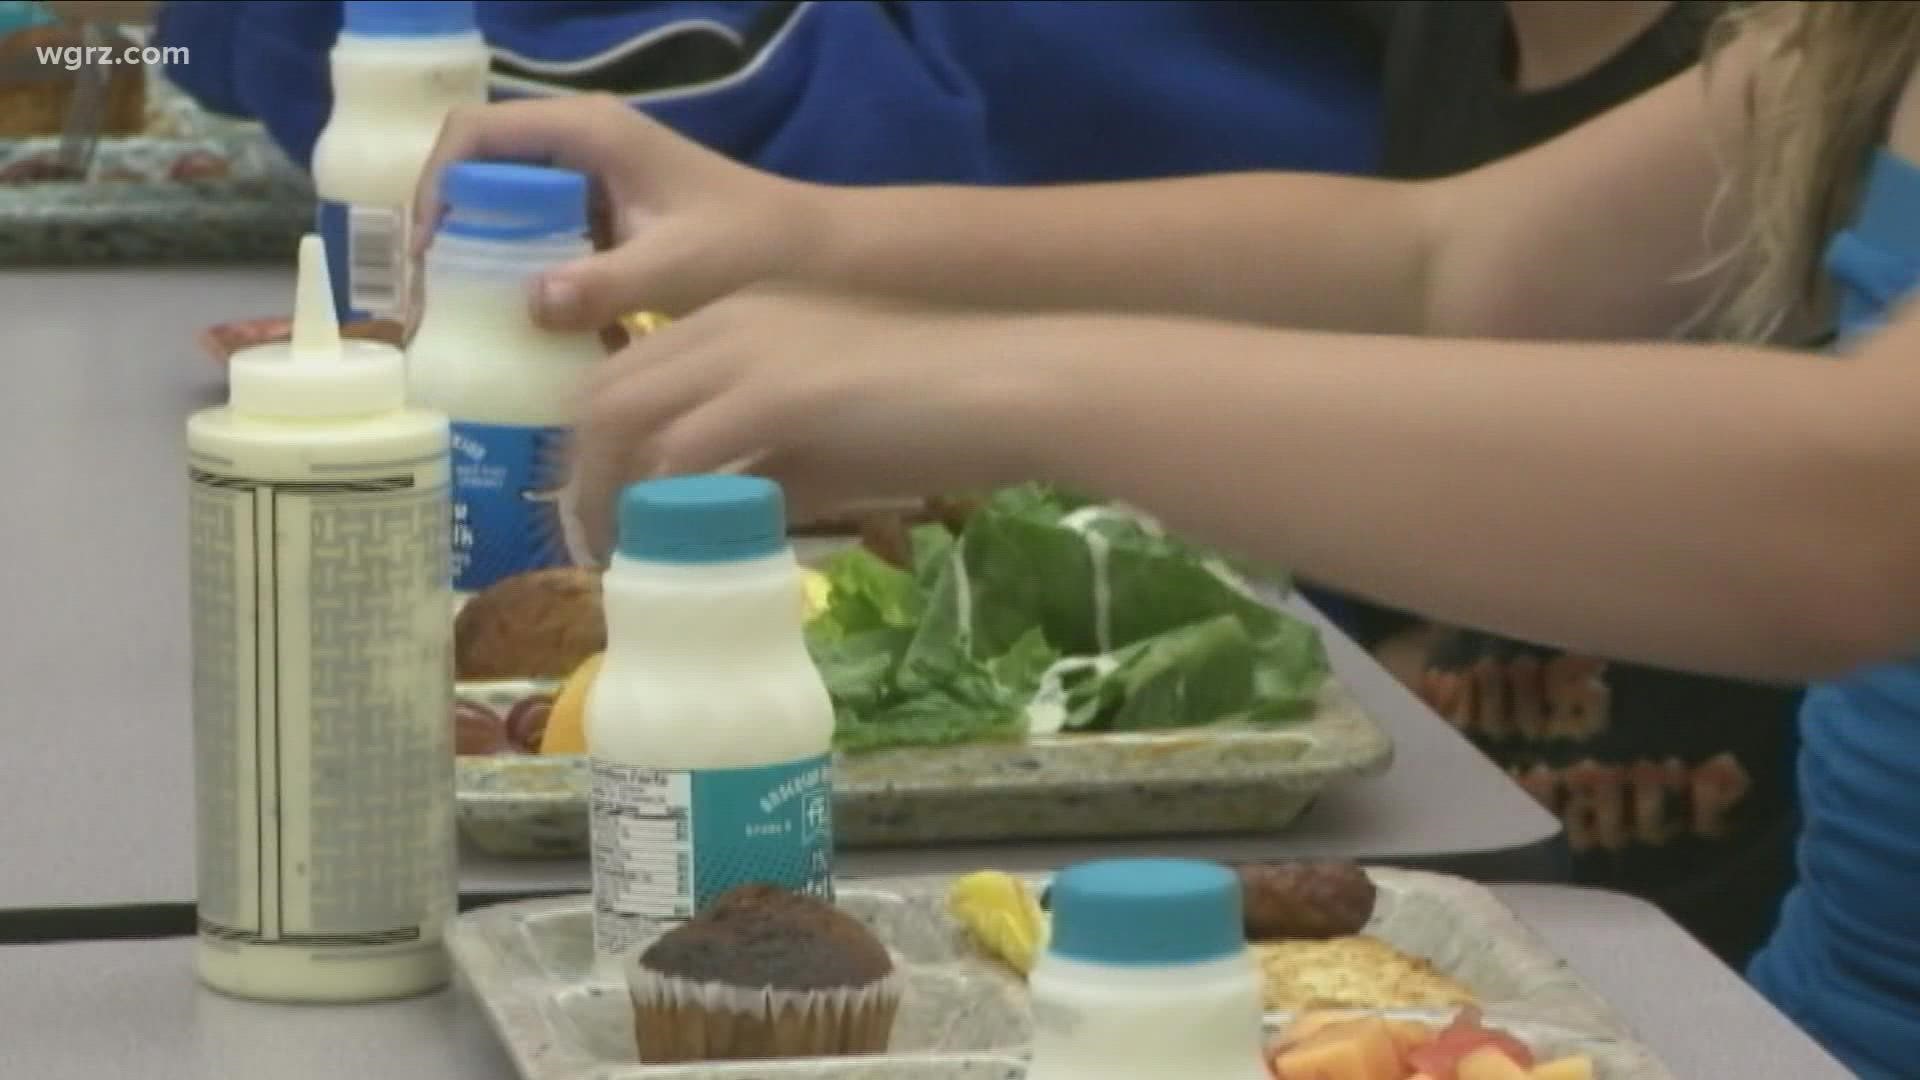 This summer the federal government is trying to make it easier for schools to feed students who are facing food insecurity.